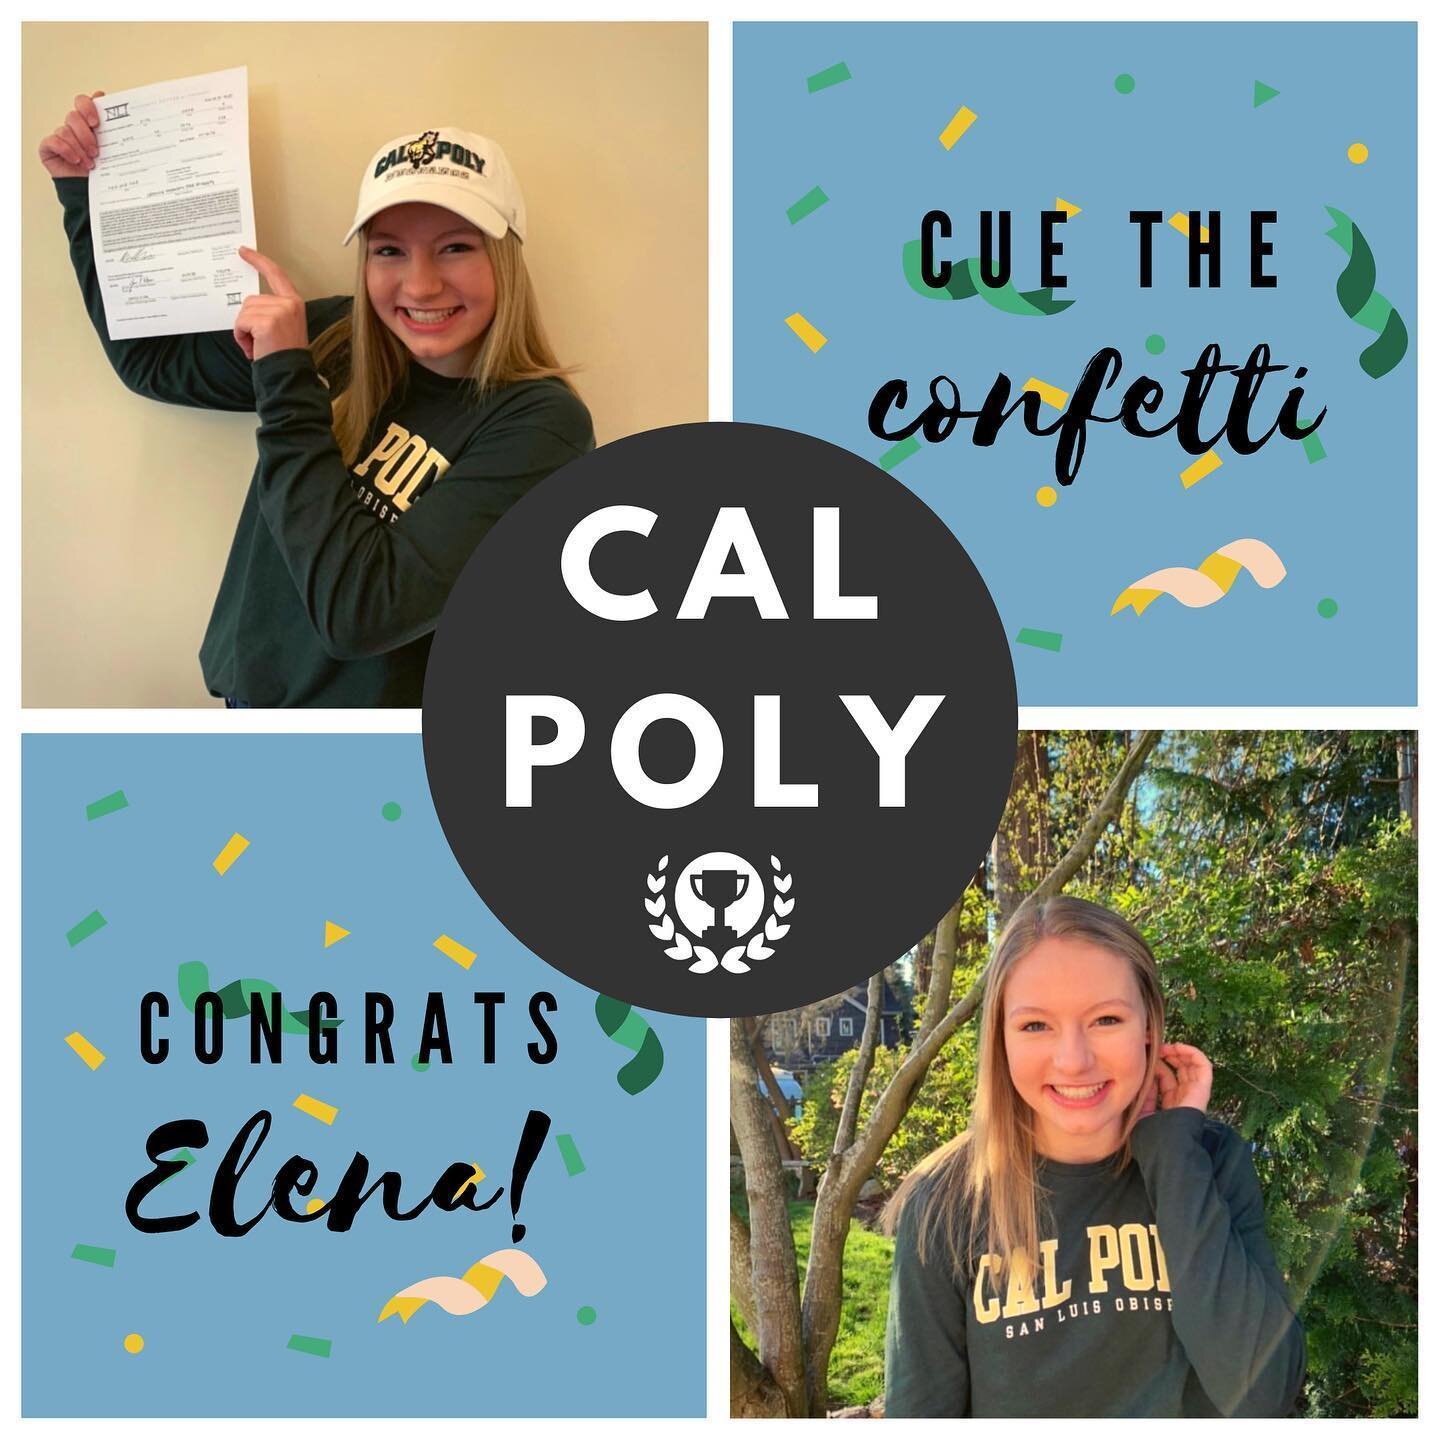 🎉Congratulations to @elenakline on committing to Cal Poly! 🏆
.
We&rsquo;re excited to see what you will accomplish at the next level. You were able to accomplish so much in such a short amount of time! We can&rsquo;t wait to see all your hard work 